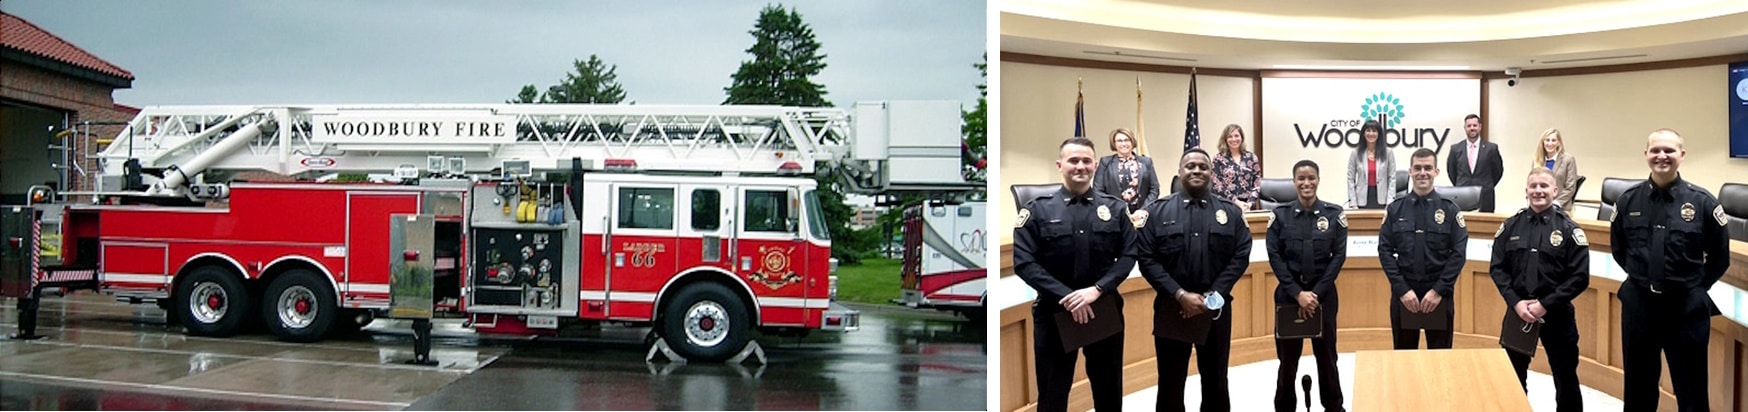 Woodbury Fire Department and Police Officers in City Hall